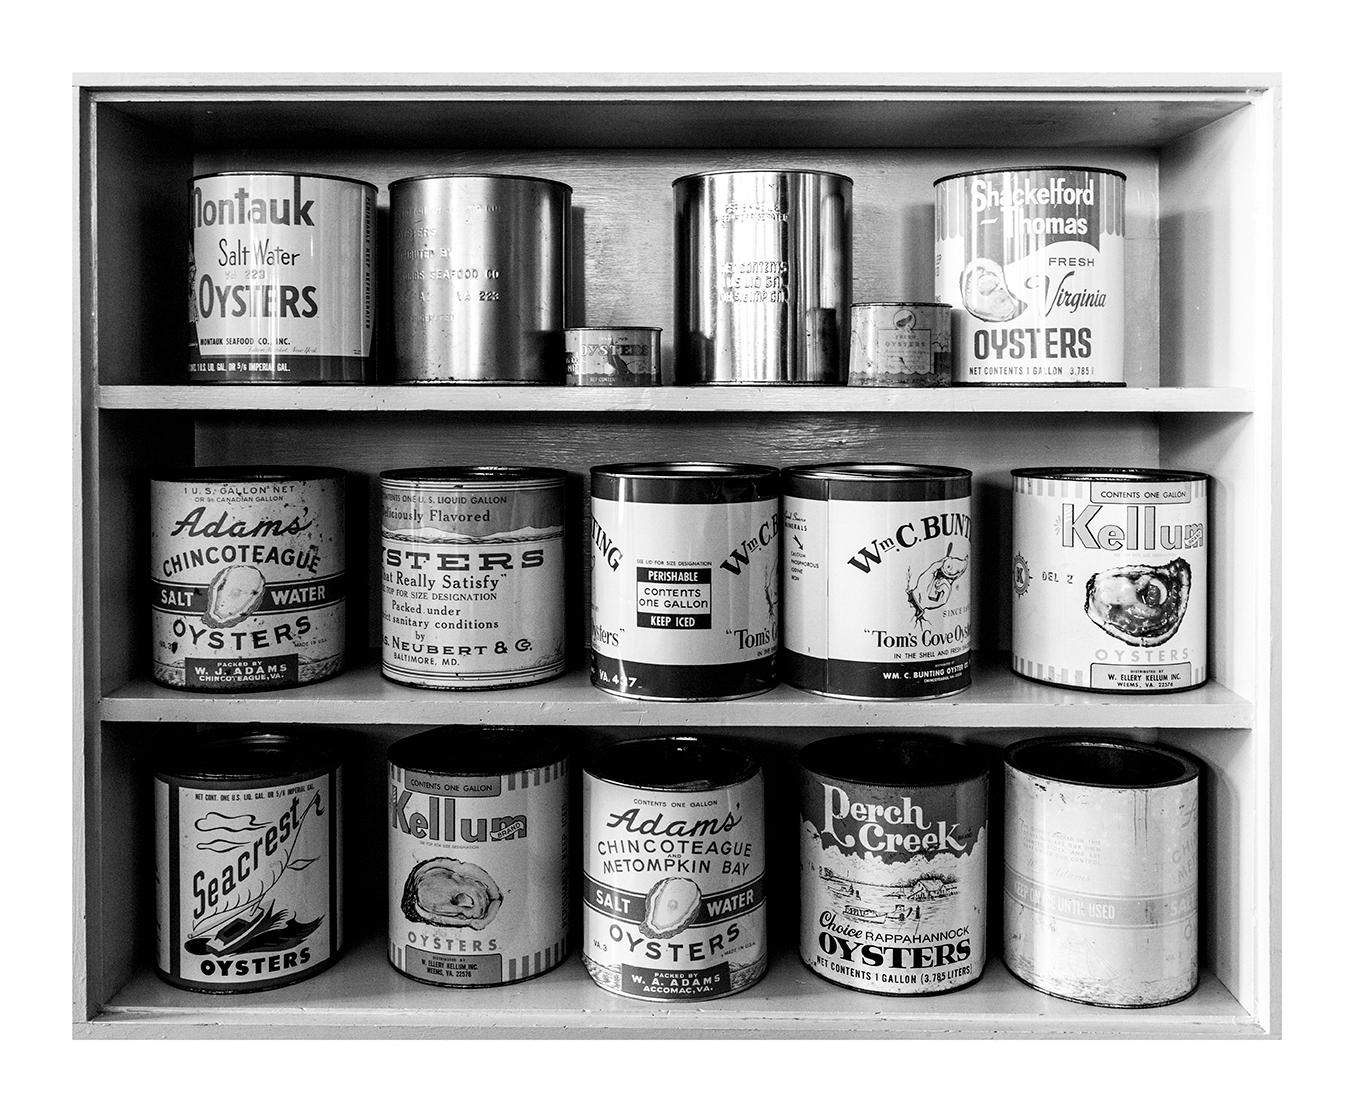 Vintage Oyster Cans, Chicoteague, Virginia